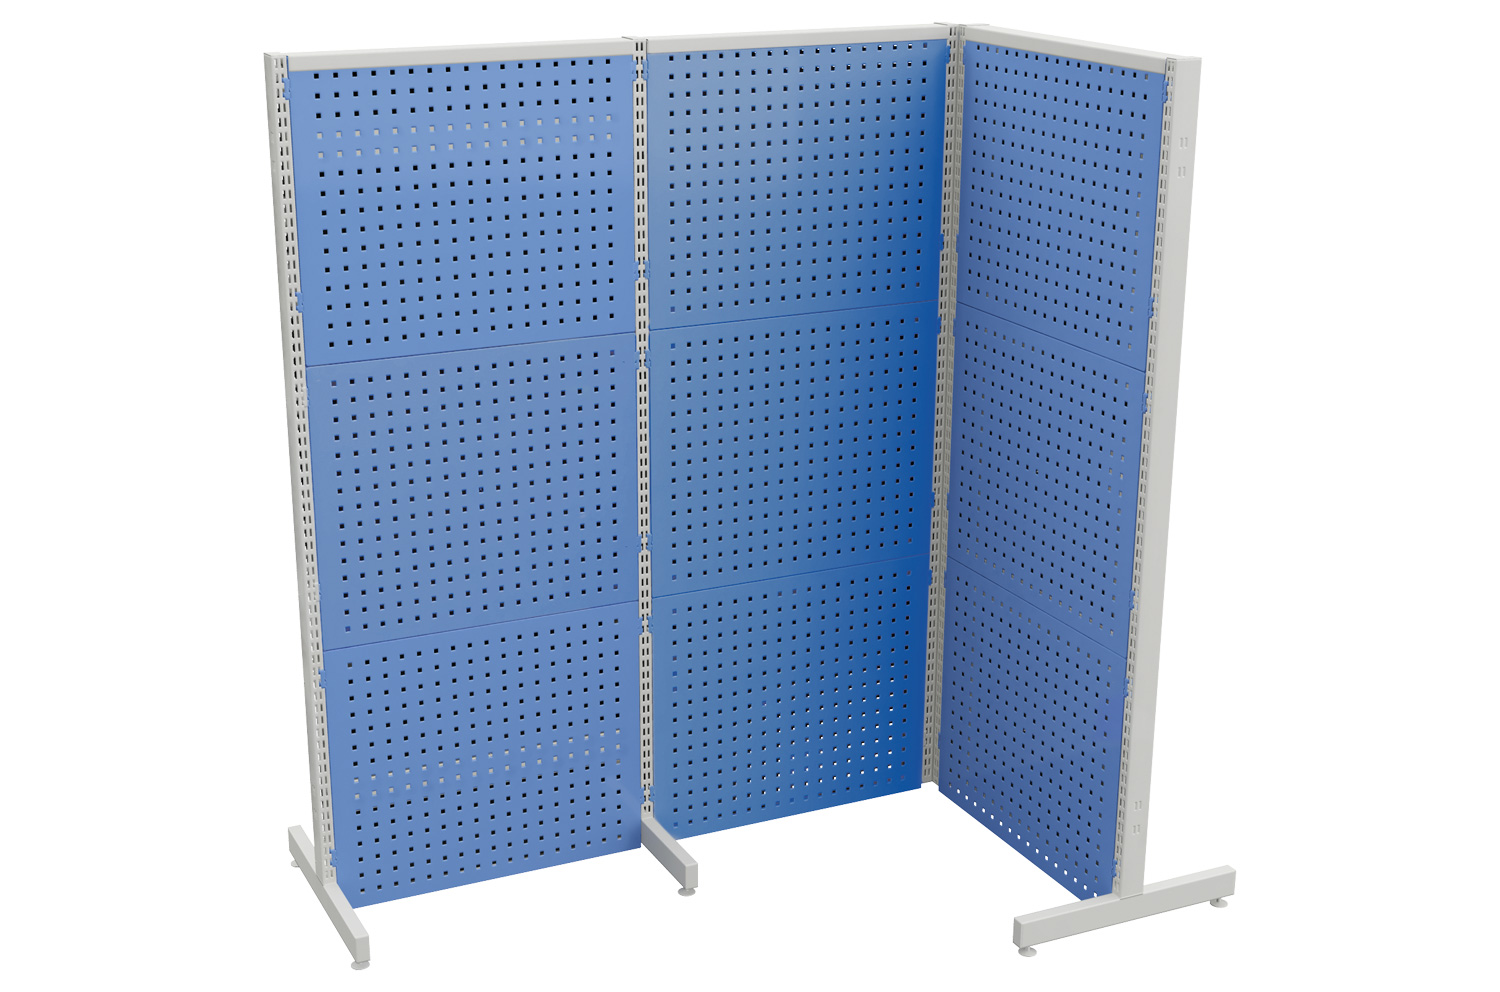 Perforated stands